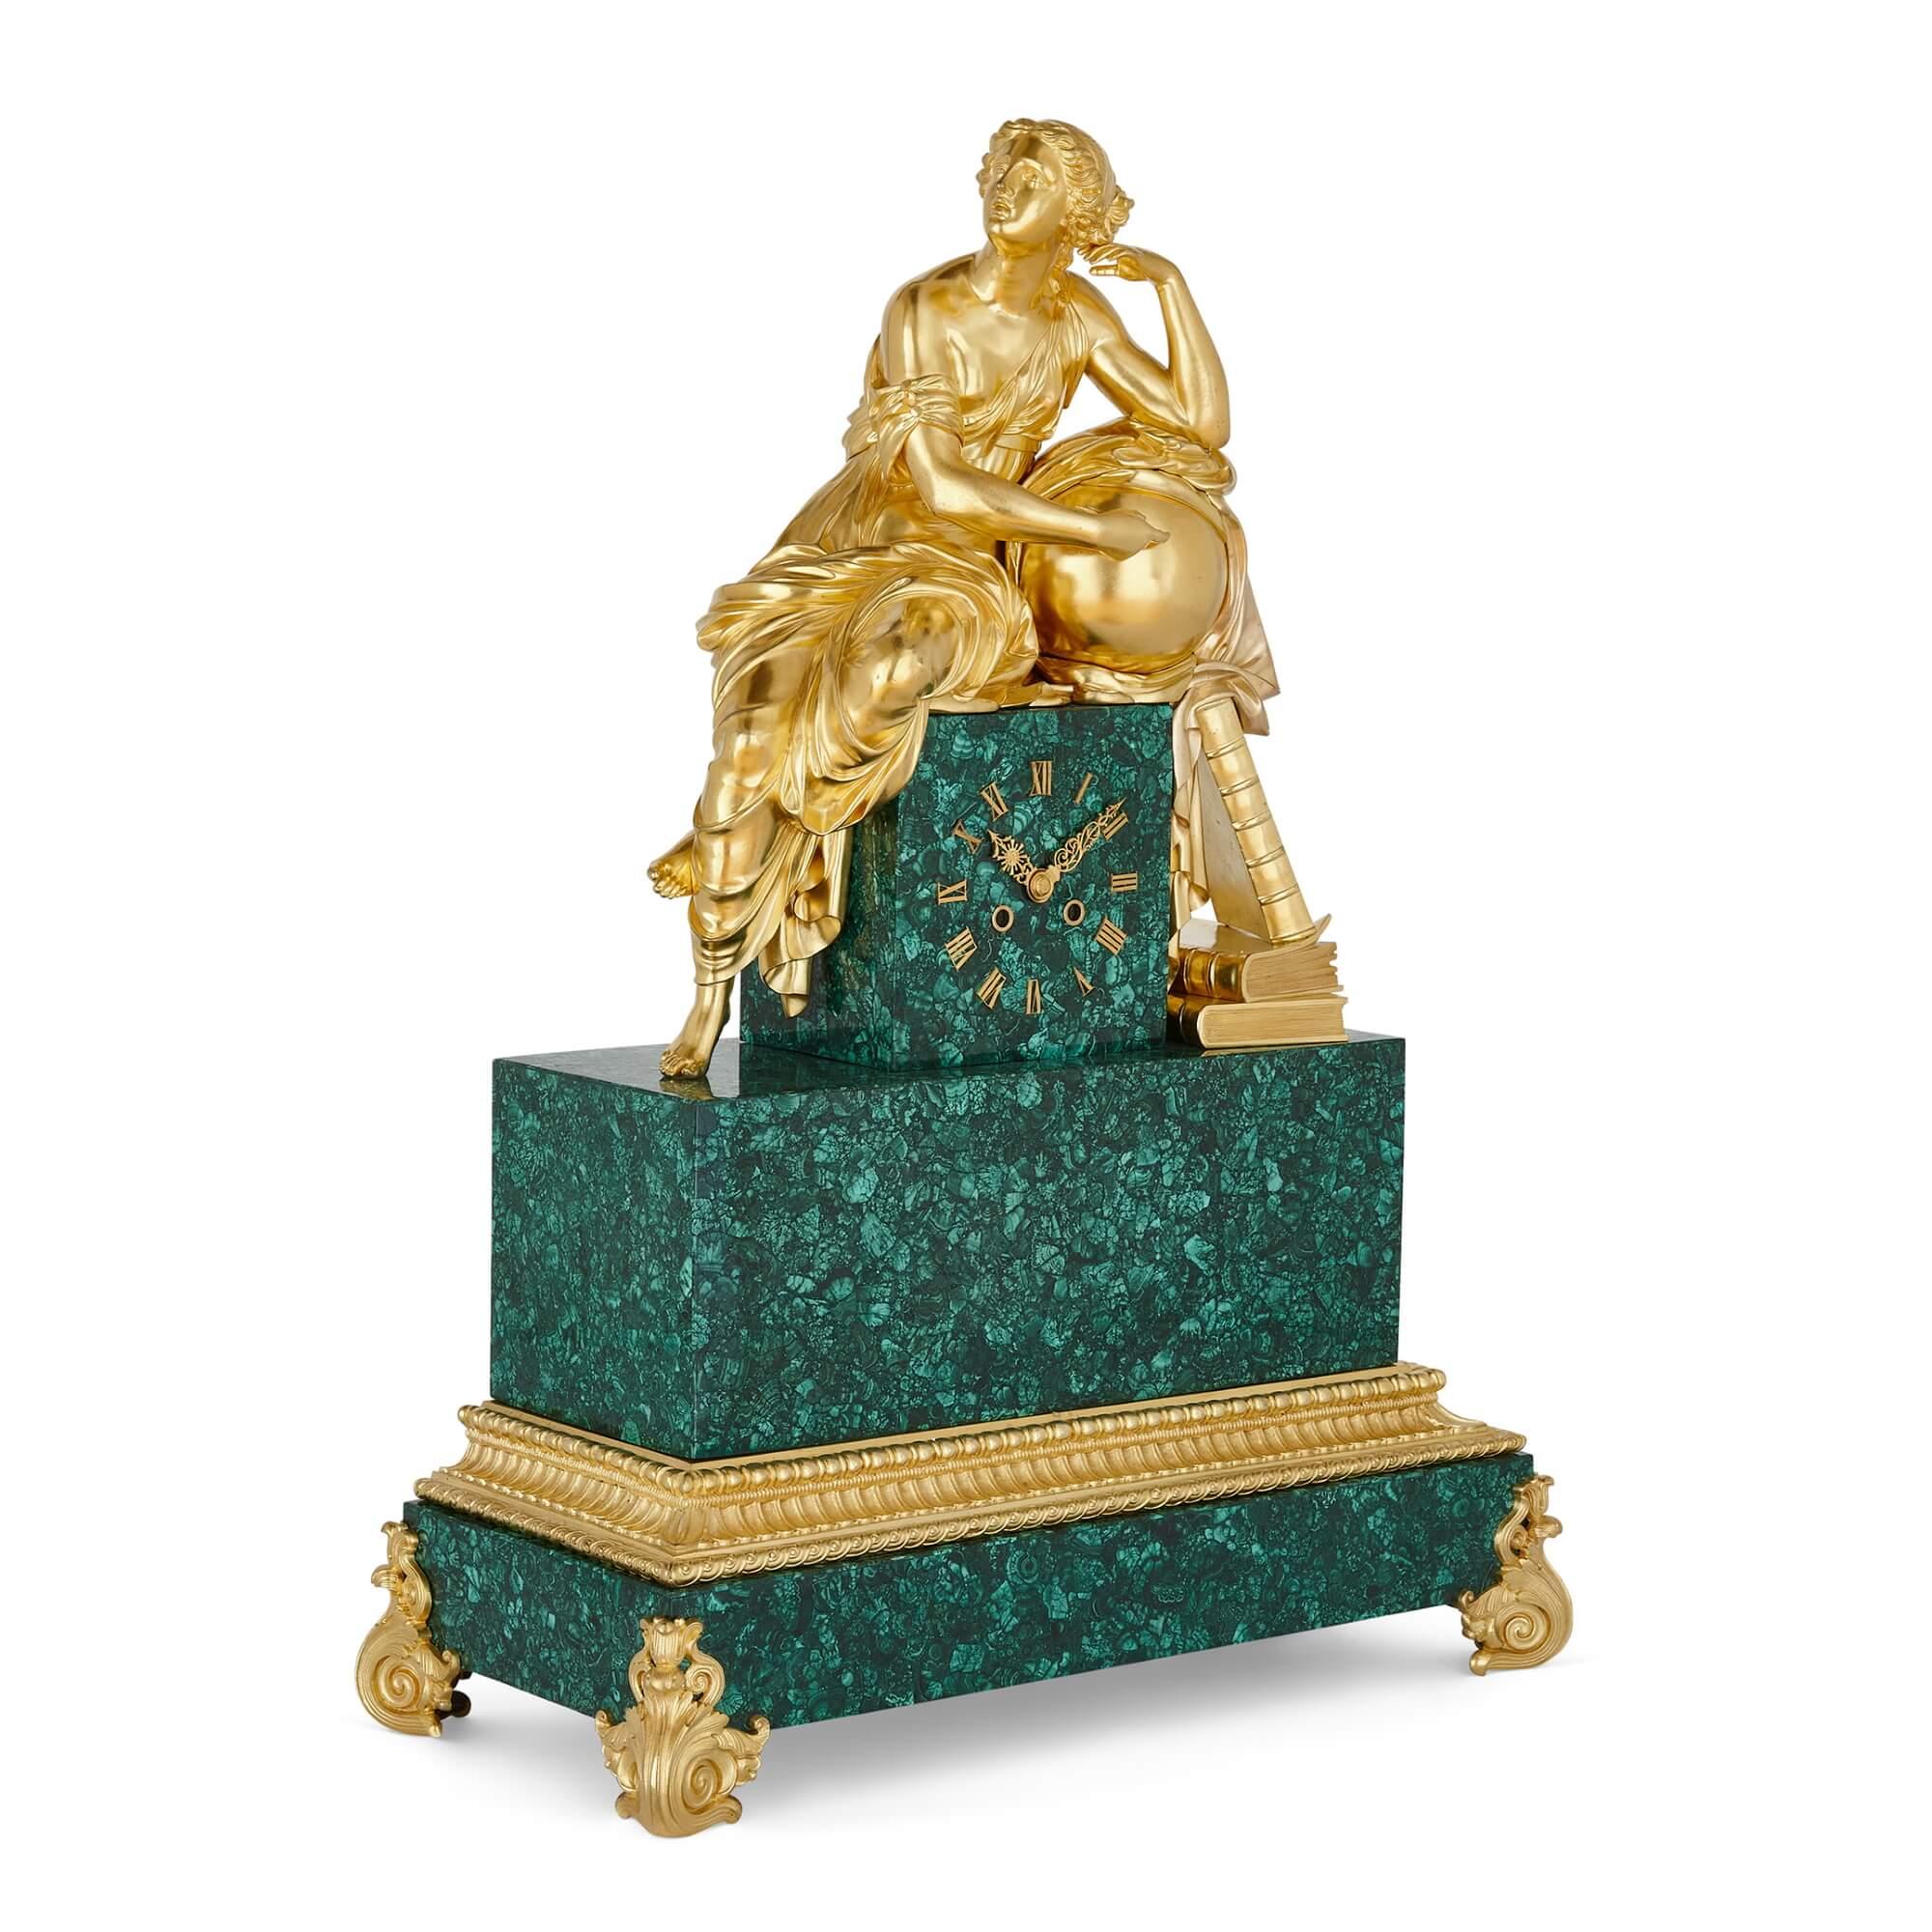 Large gilt-bronze and malachite Charles X style mantel clock
French, 19th Century
Height 74cm, width 53cm, depth 24cm

This superb and impressively large mantel clock is cased in a vibrant malachite veneer, and adorned with radiant ormolu